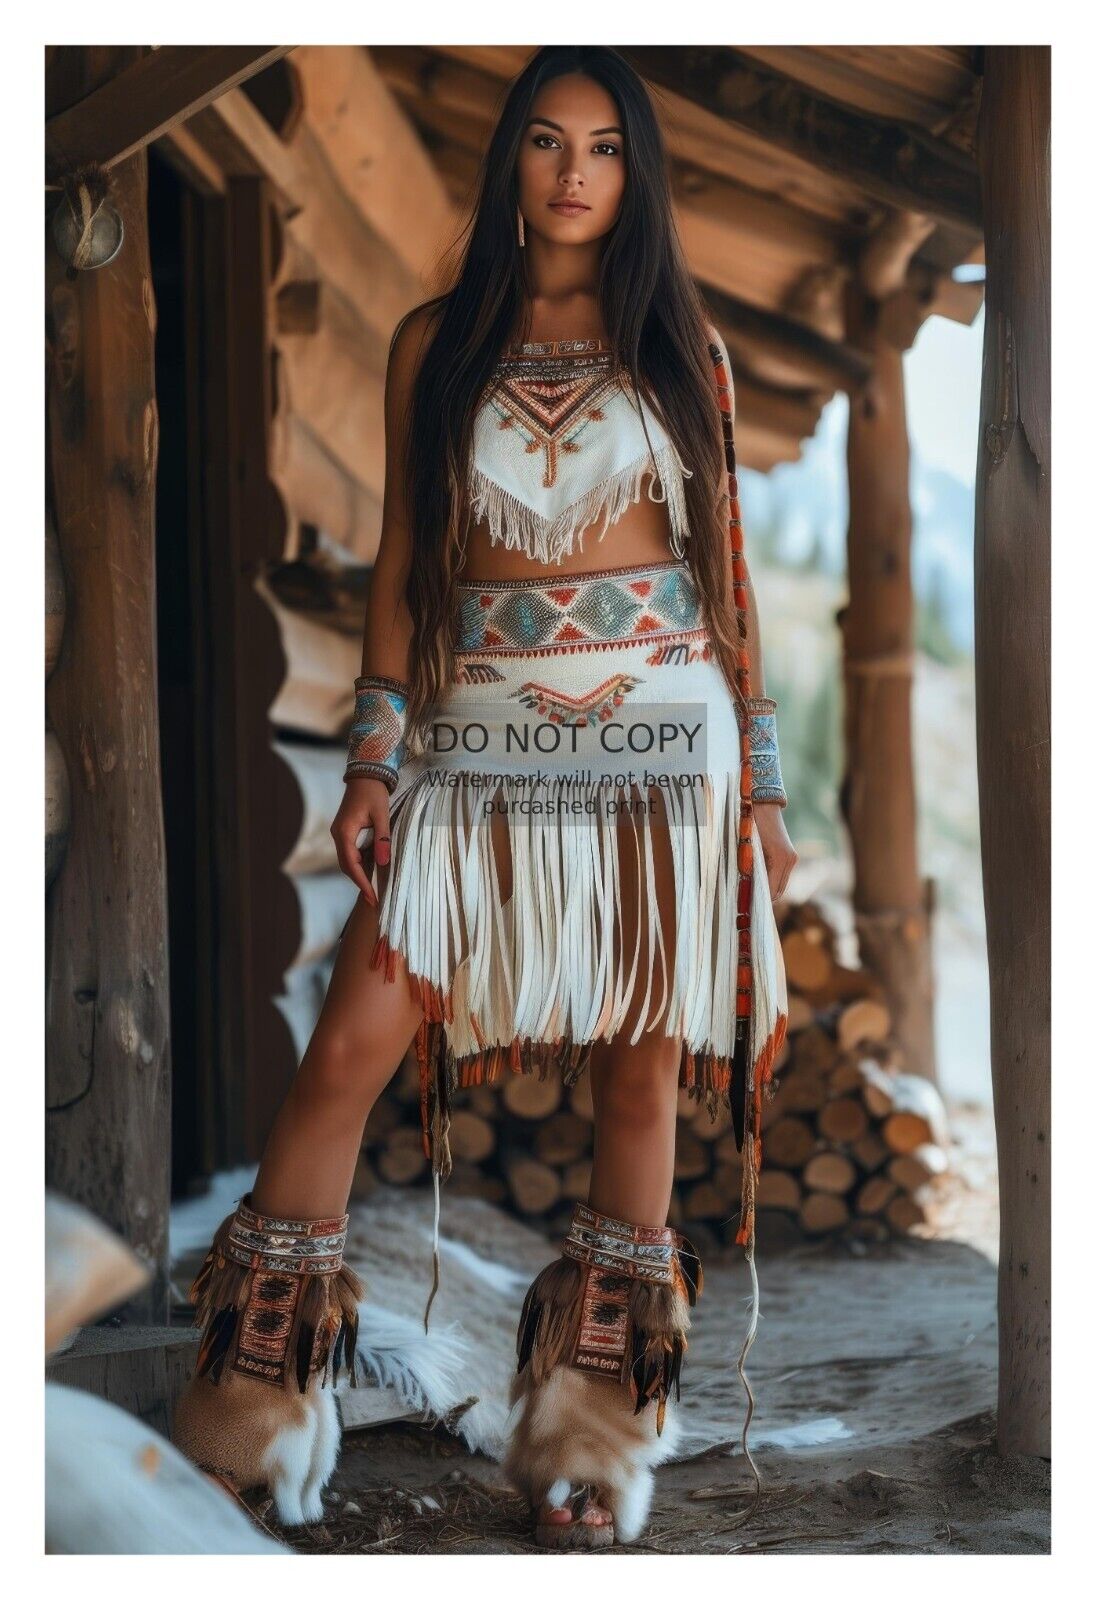 GORGEOUS YOUNG NATIVE AMERICAN LADY LOG CABIN 4X6 FANTASY PHOTO